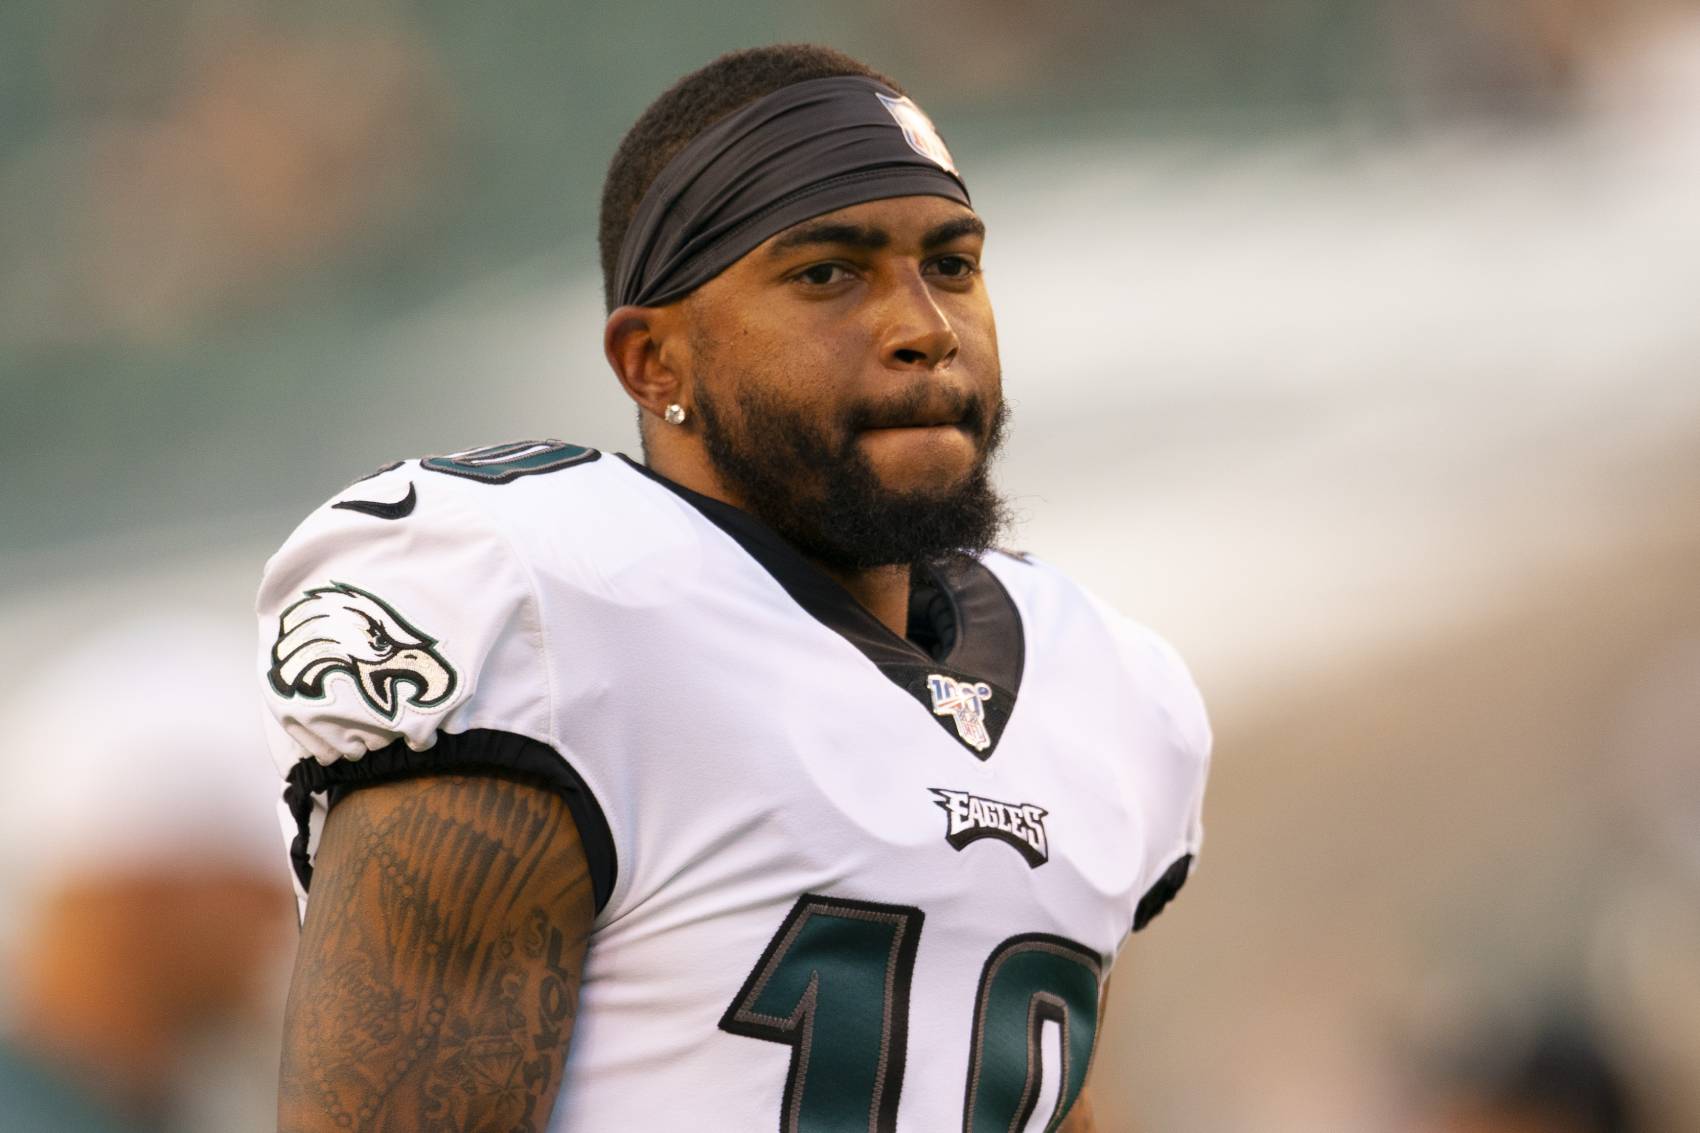 Oft-controversial Philadelphia Eagles receiver DeSean Jackson shared anti-Semitic comments on Instagram.